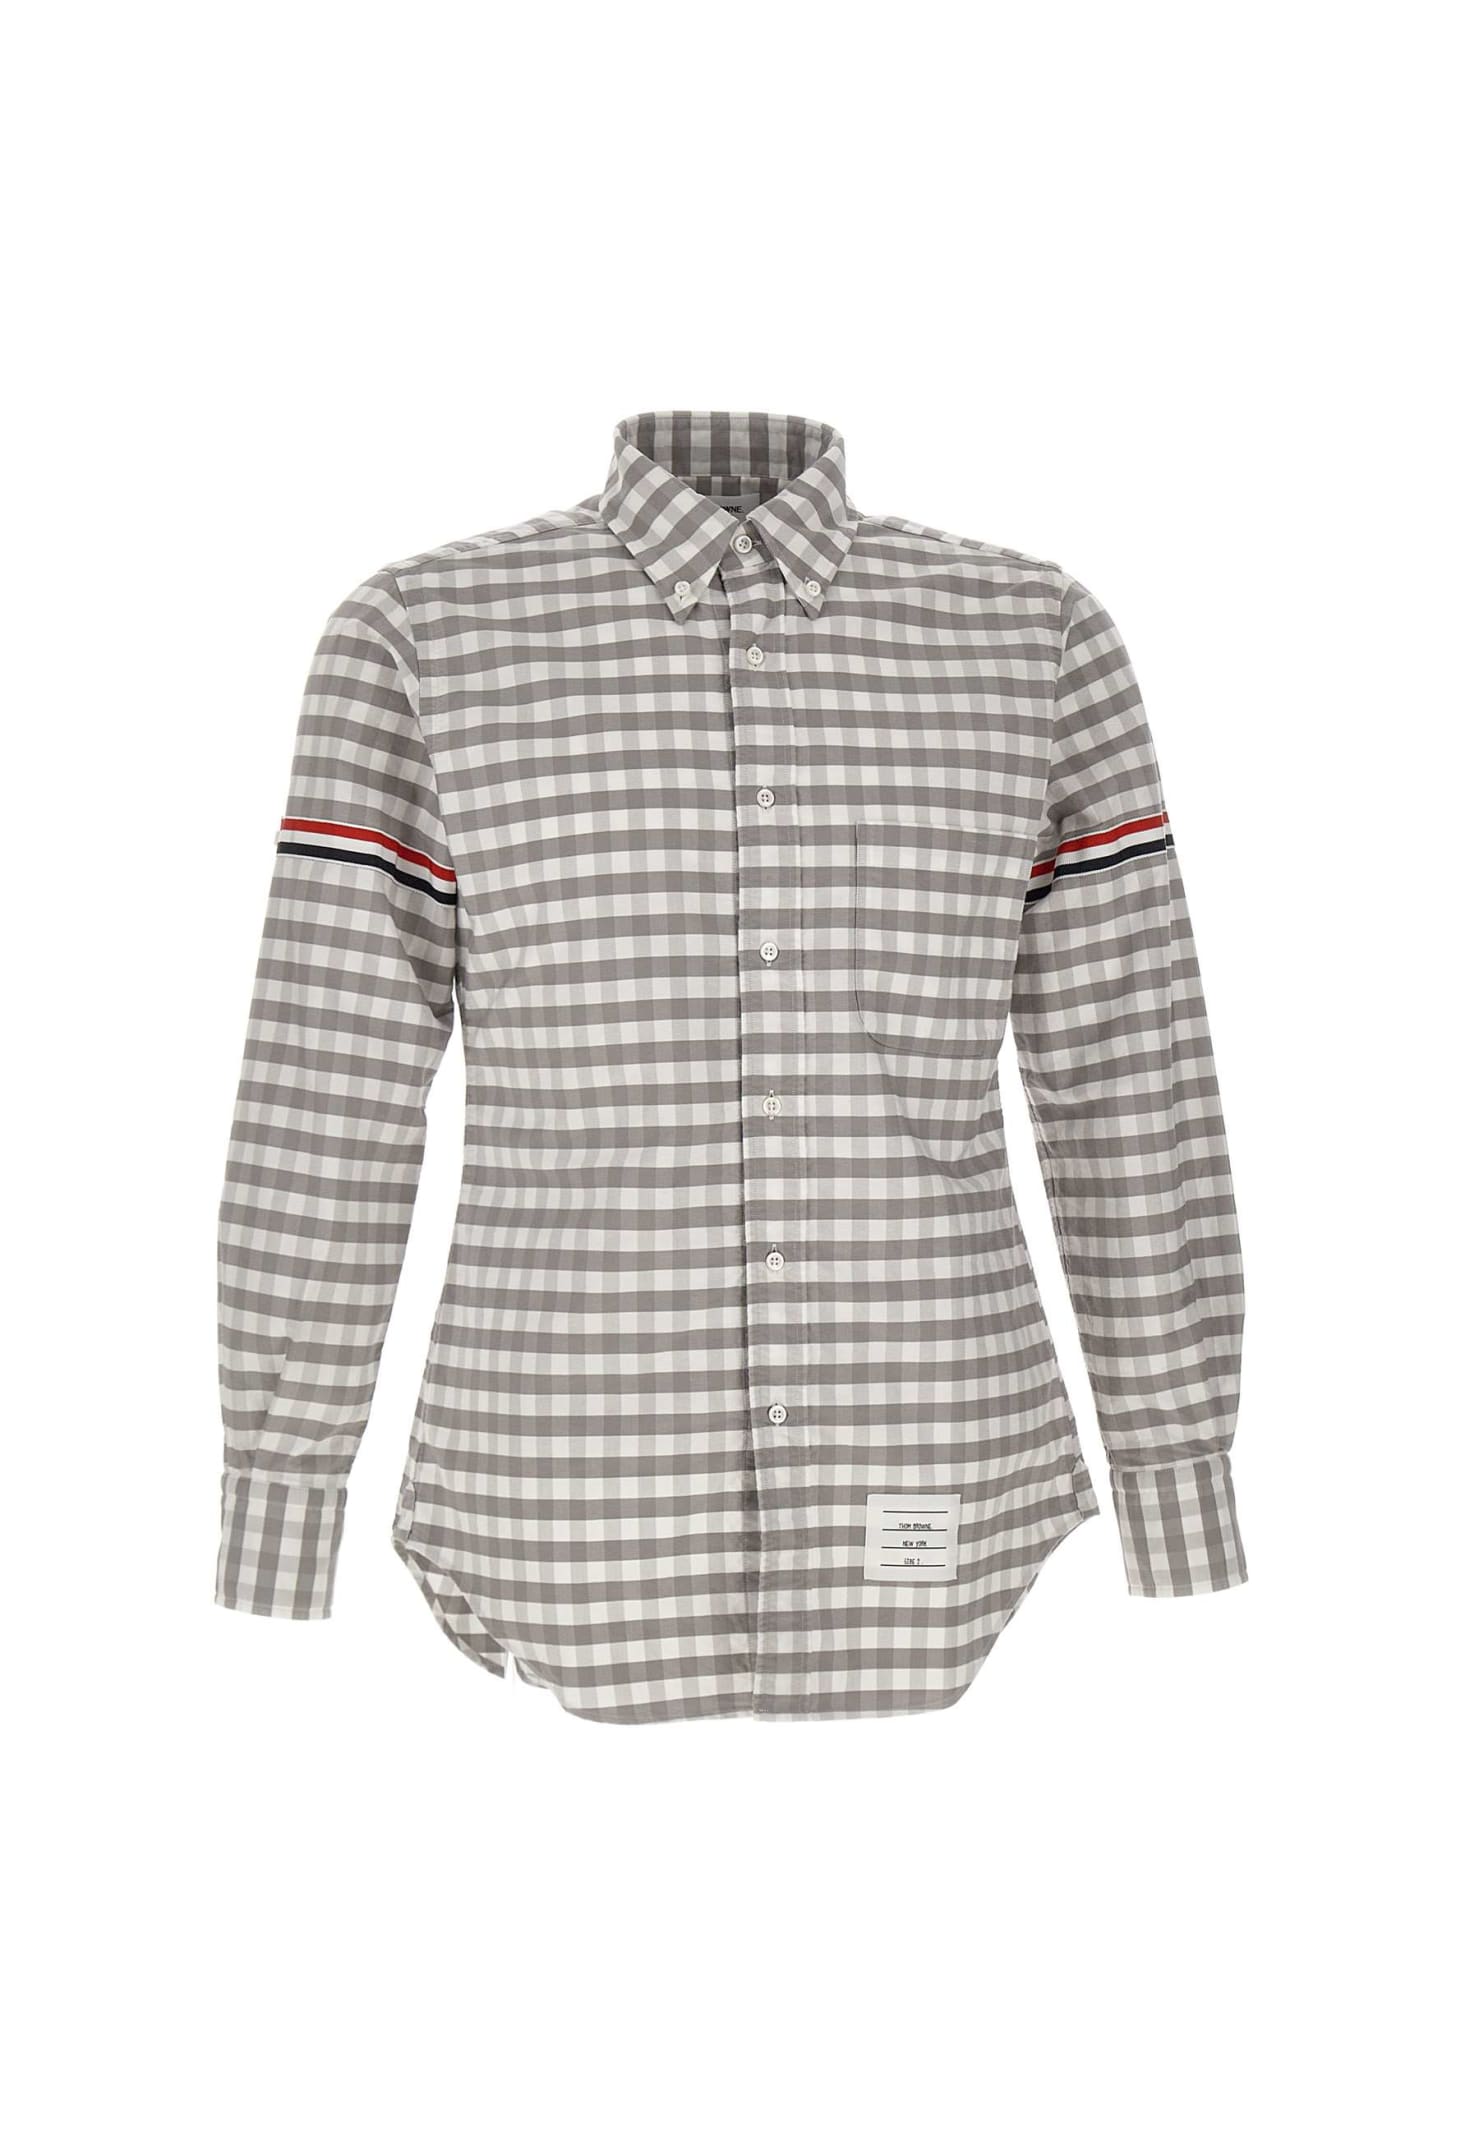 THOM BROWNE COTTON CLASSIC FIT SHIRT CHECK OXFORD